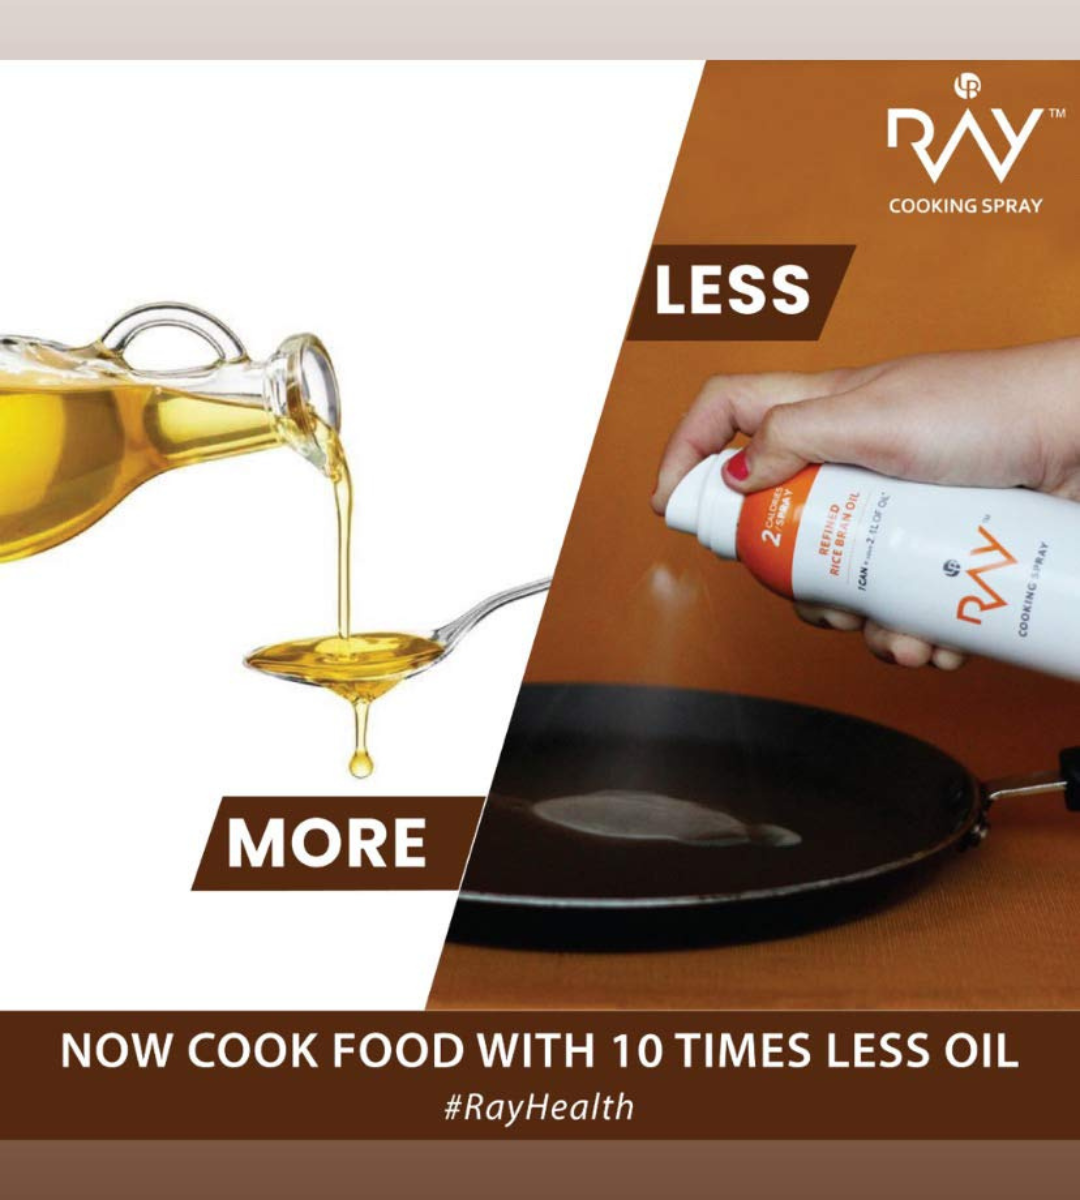 LB RAY Cooking Spray Groundnut Oil - Low-Calorie, 100% Oil Spray, No Gases, Emulsifiers, and Water (200 ml)